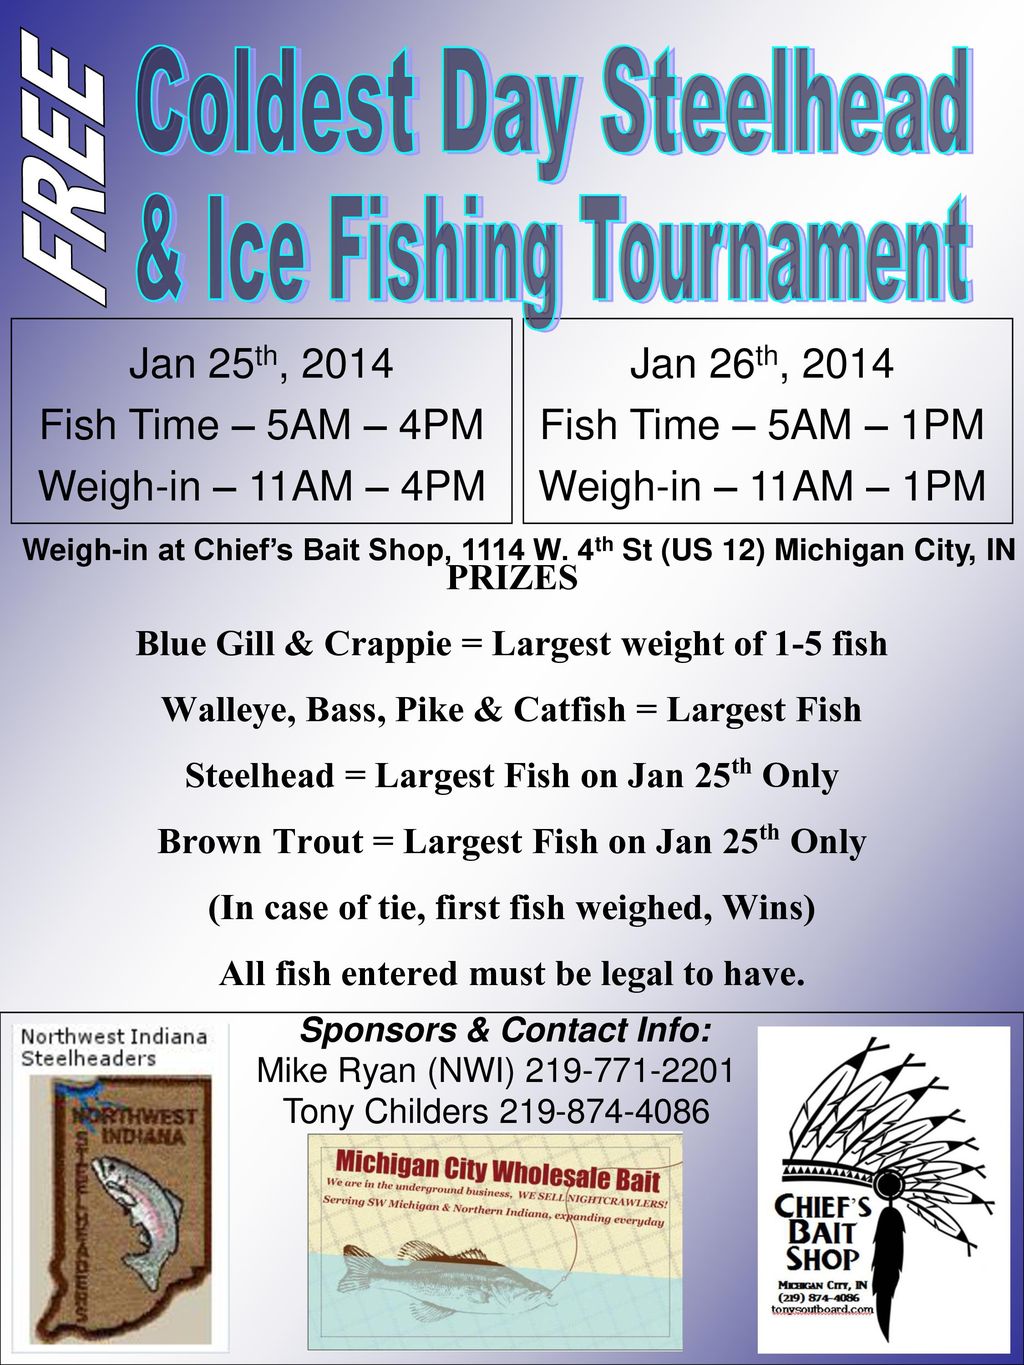 Jan 25th, 2014 Fish Time – 5AM – 4PM Weigh-in – 11AM – 4PM